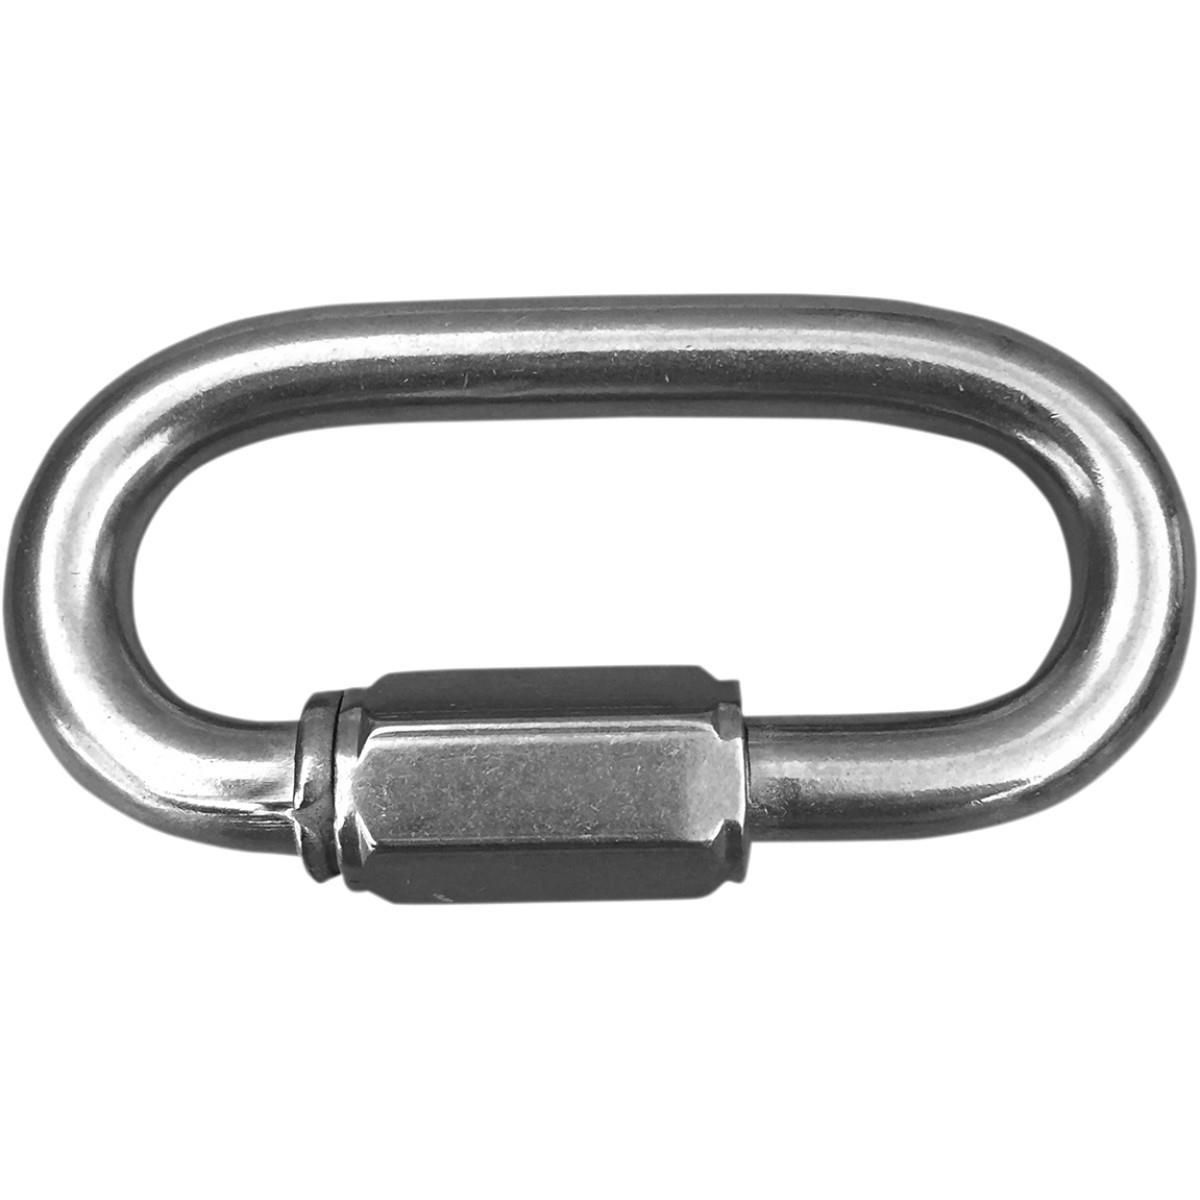 2E8I-PARTS-UNLIM-24040656 Stainless Steel Quick Link - 1/4in. x 2-1/4in.